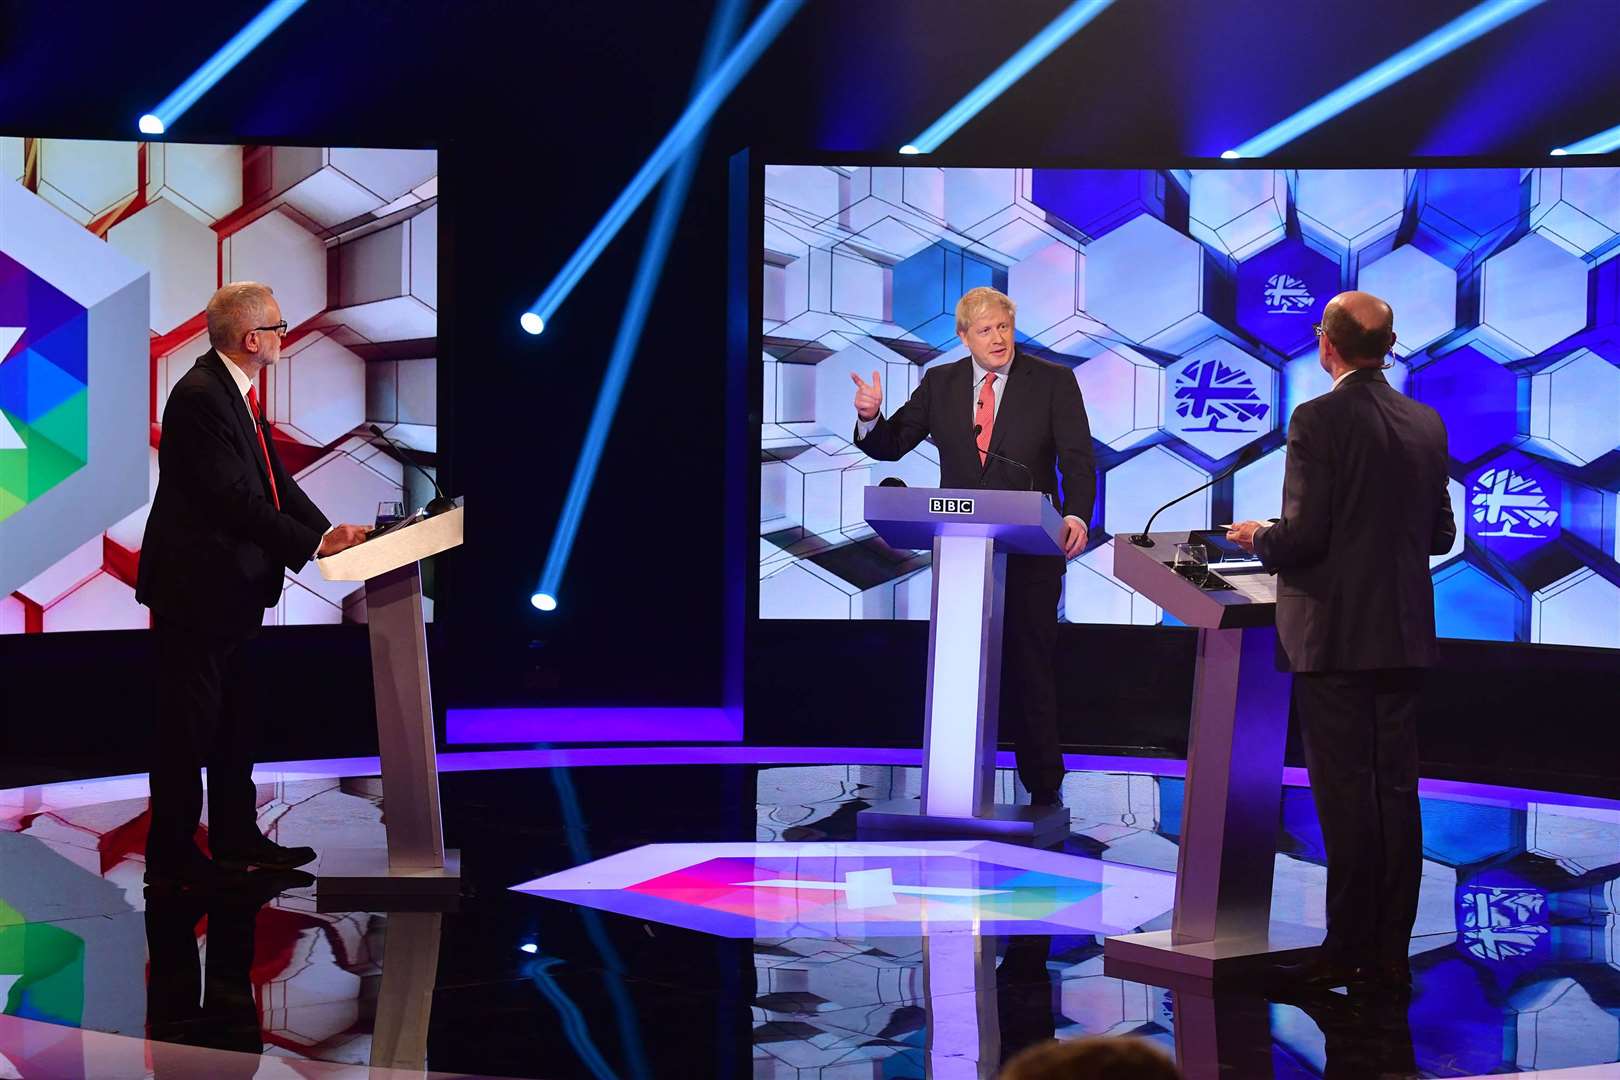 Prime Minister Boris Johnson and Labour leader Jeremy Corbyn going head to head in the BBC Election Debate in Maidstone, Picture: Jeff Overs/BBC/PA Wire